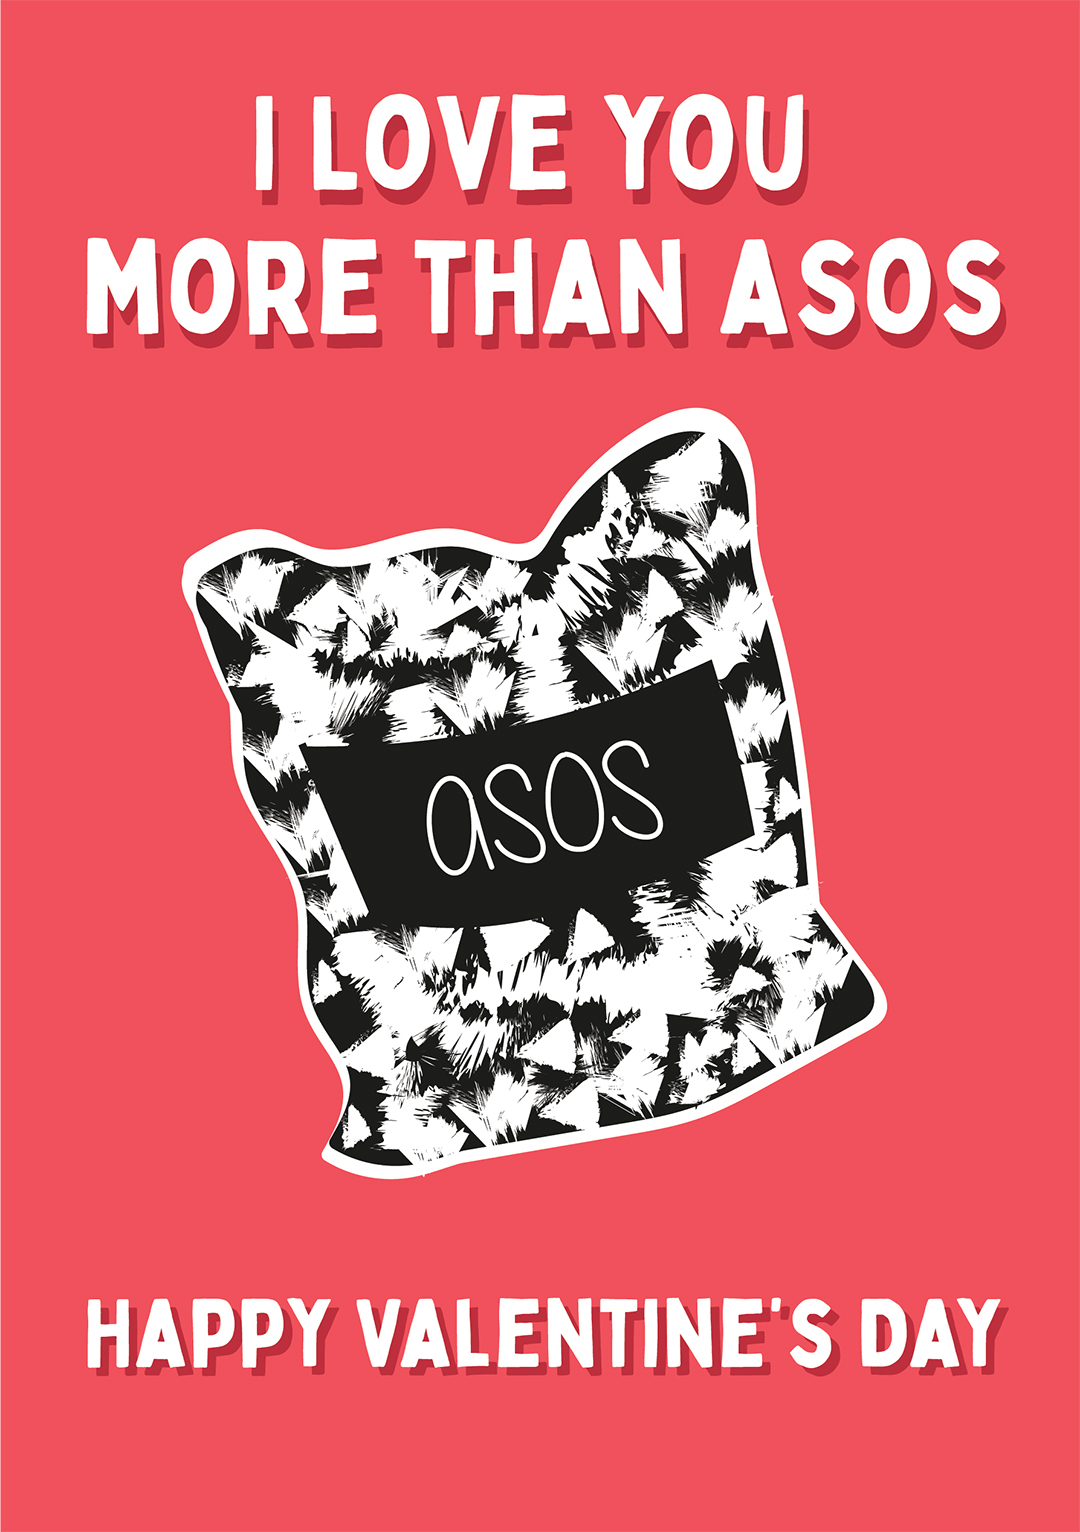 I Love You More Than ASOS - Valentine's Day Card